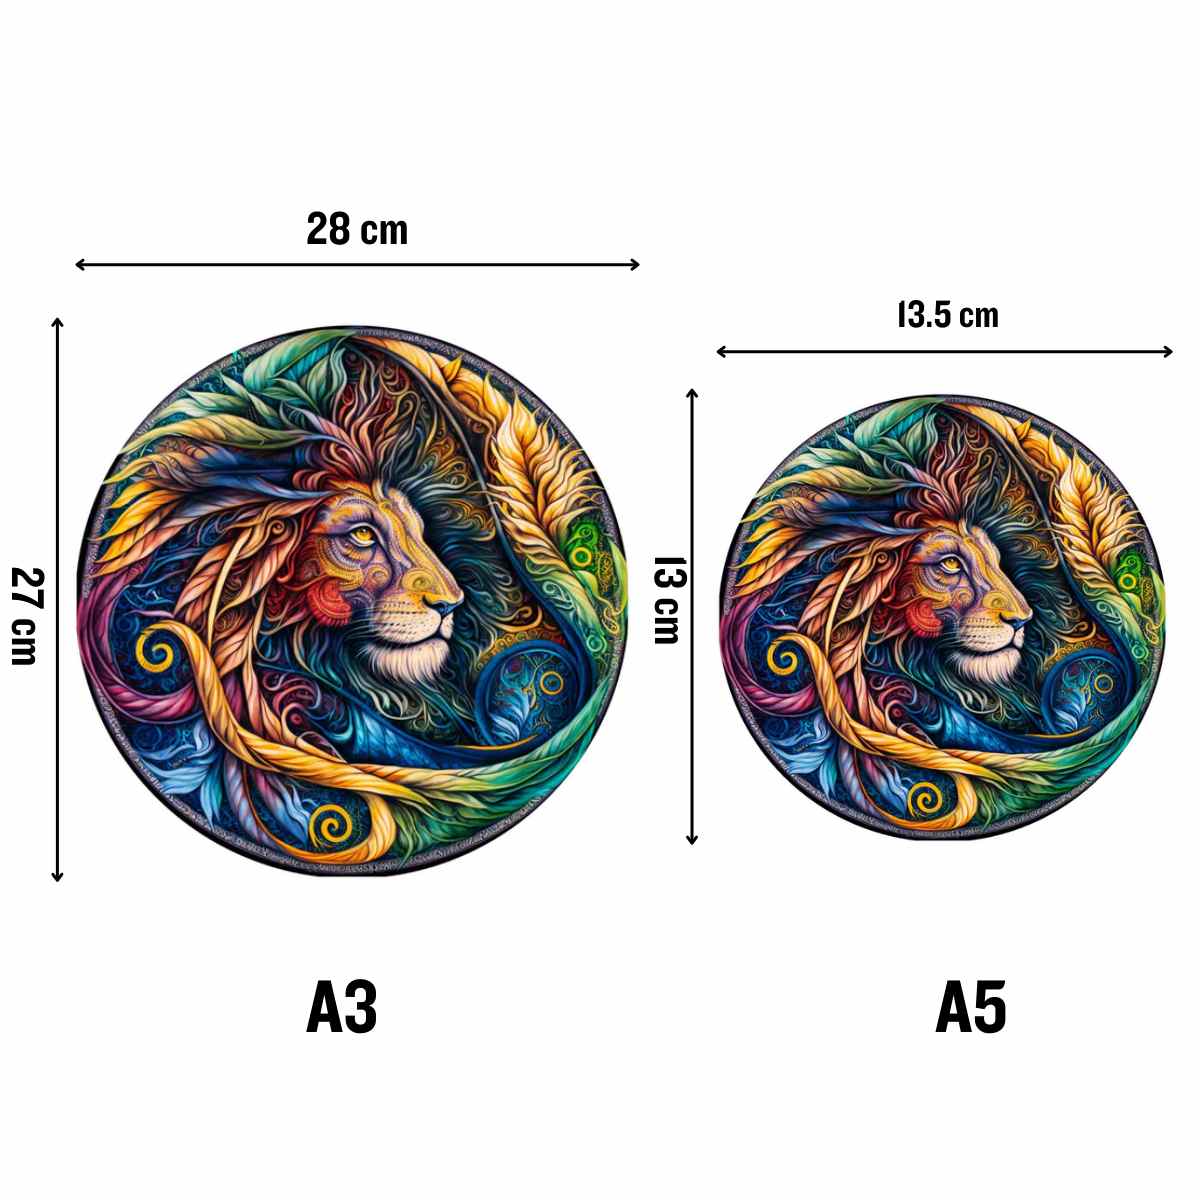 Animal Jigsaw Puzzle > Wooden Jigsaw Puzzle > Jigsaw Puzzle Fiery Lion - Jigsaw Puzzle